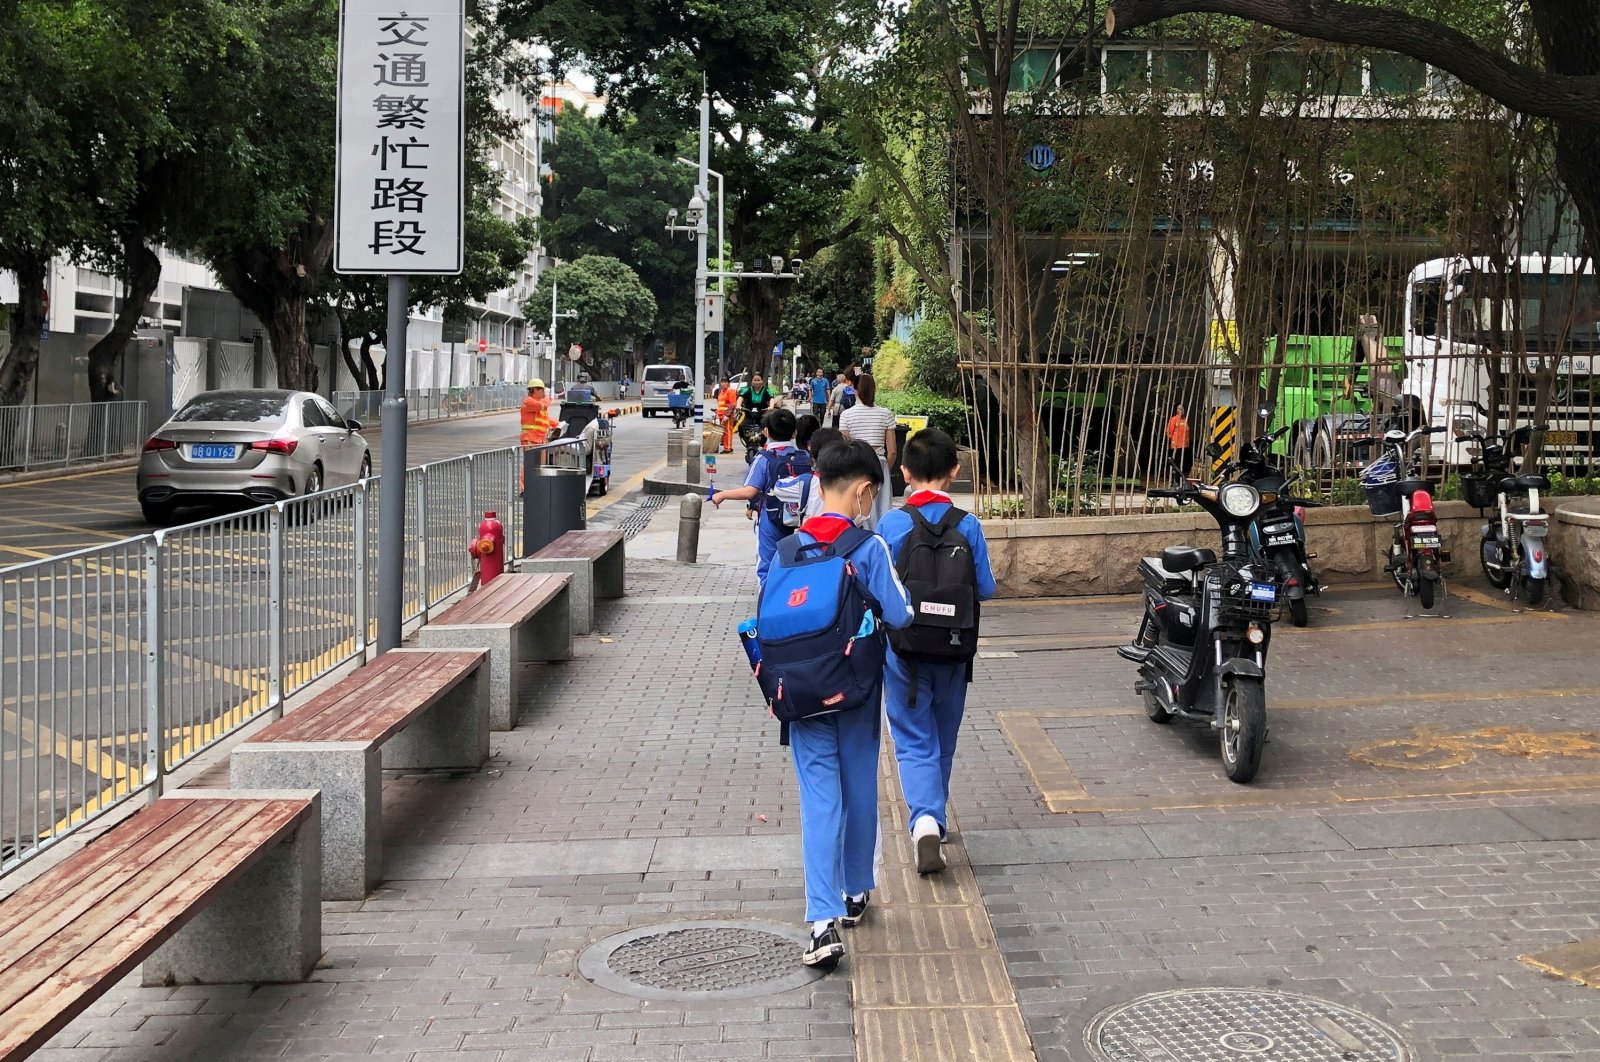 Children leave a school in the Shekou area of Shenzhen, Guangdong province, China, April 20, 2021. (Reuters Photo)